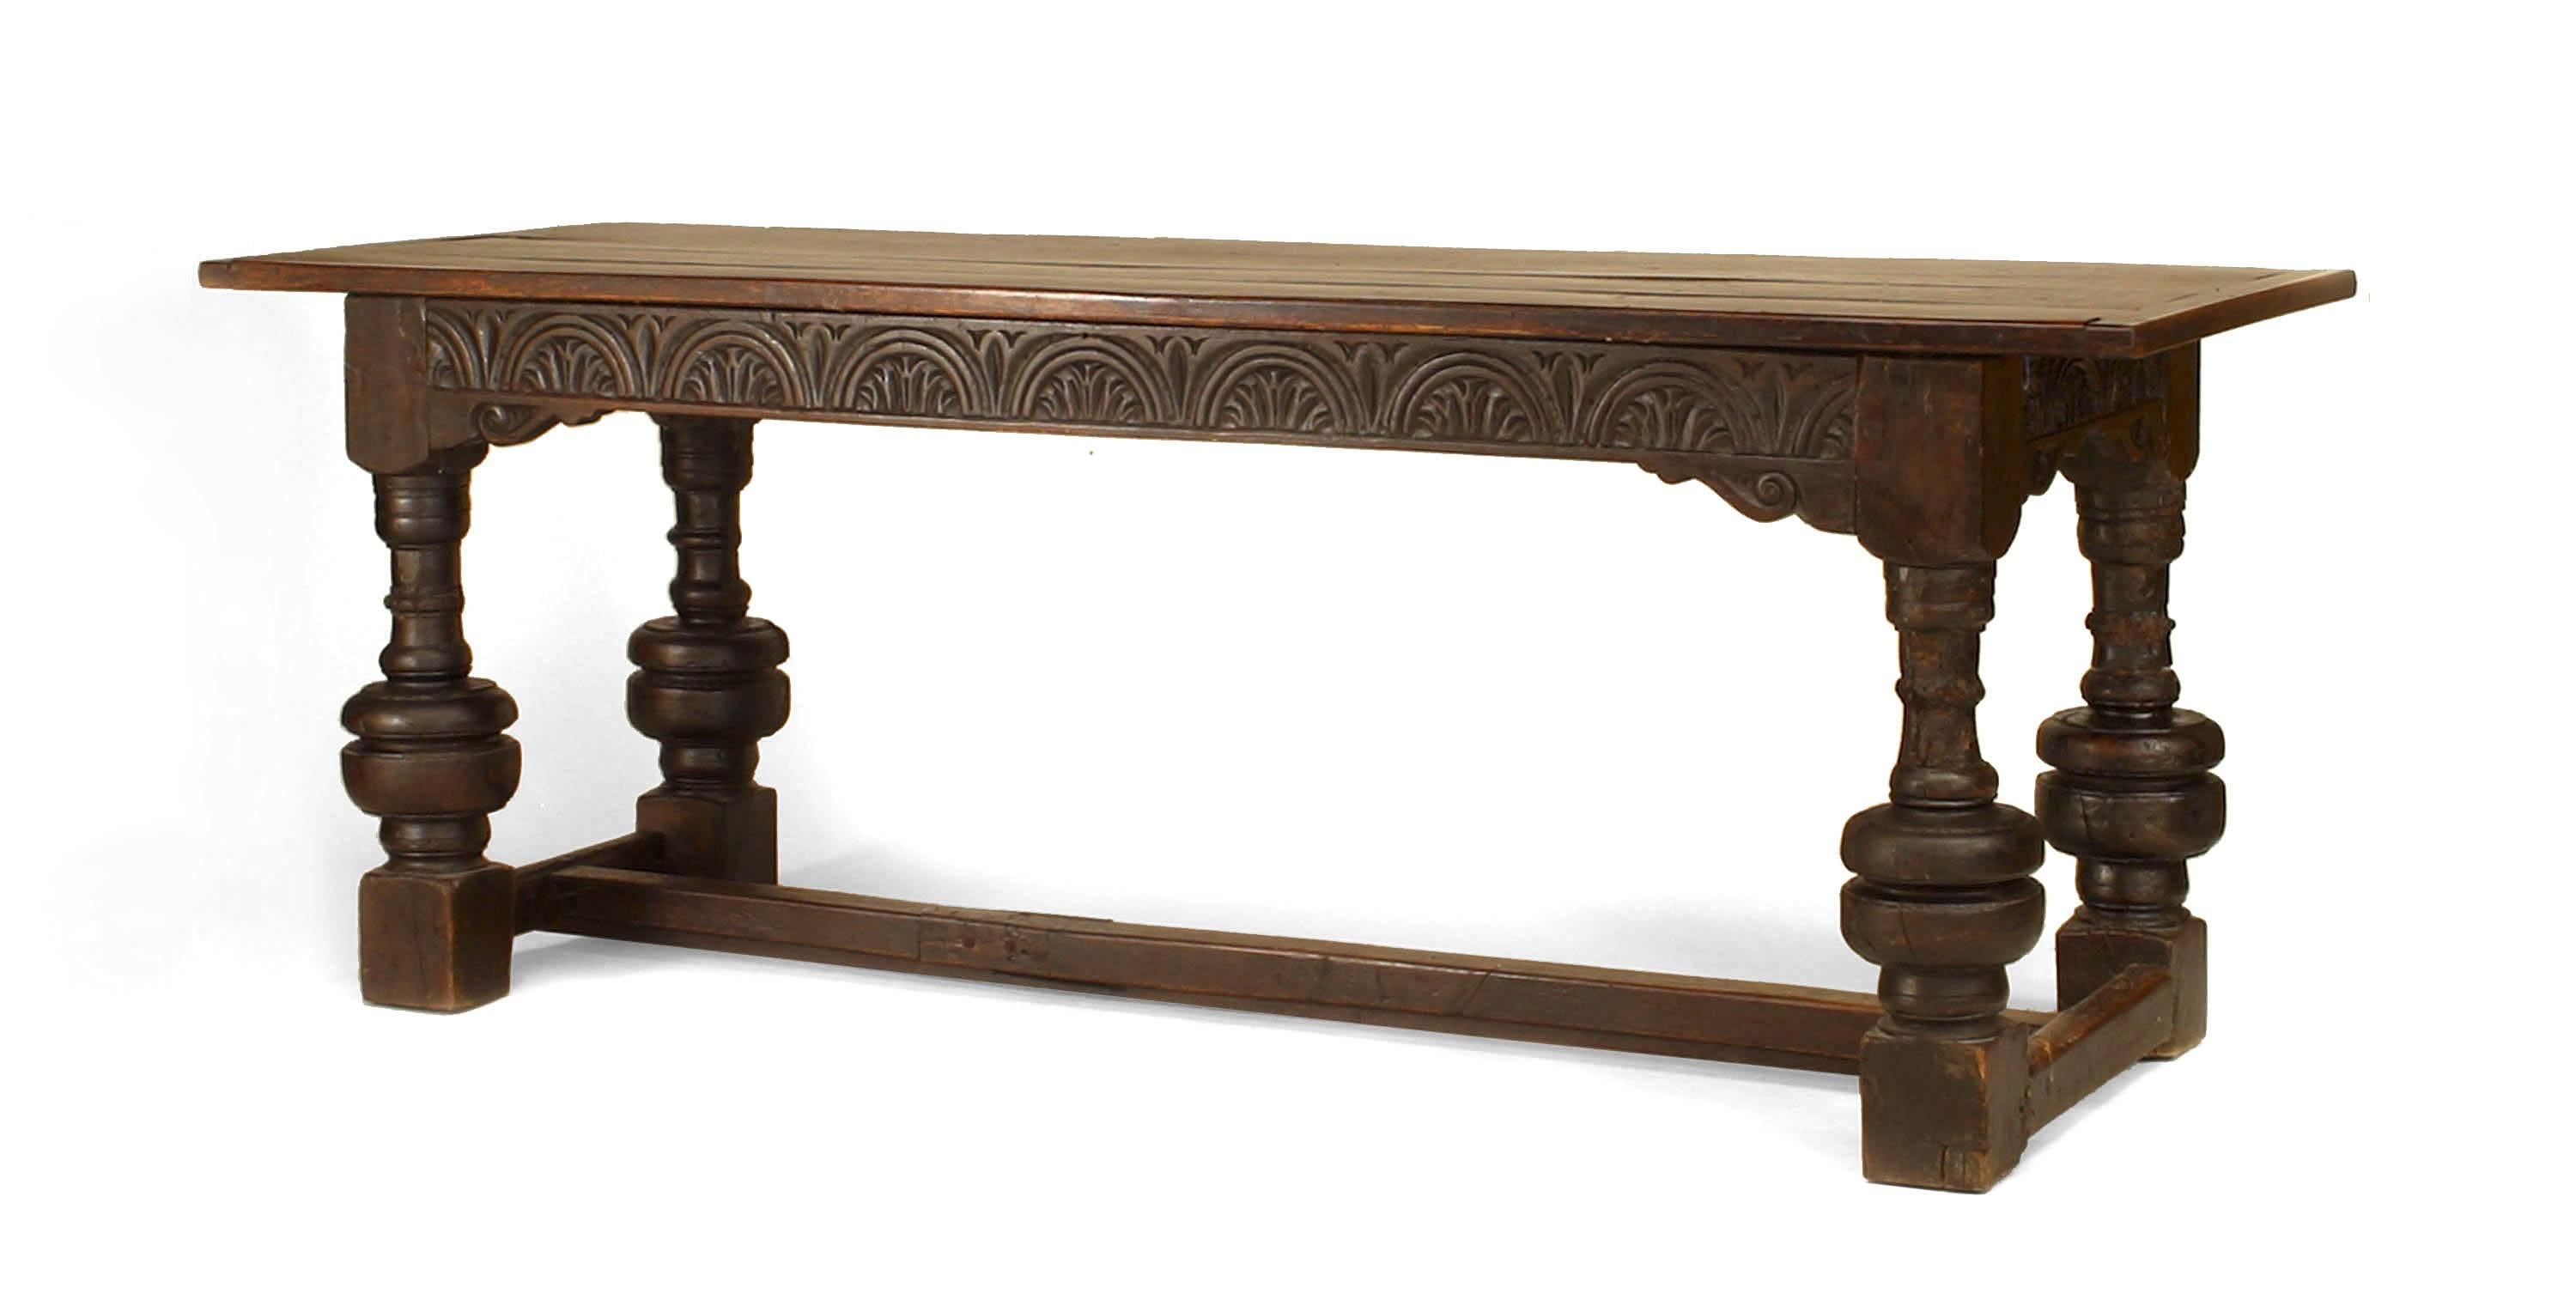 Italian Renaissance style (17th Century elements) oak refectory table with carved apron an bulbous shaped legs with a stretcher at base (plank top 19/20th Century).
